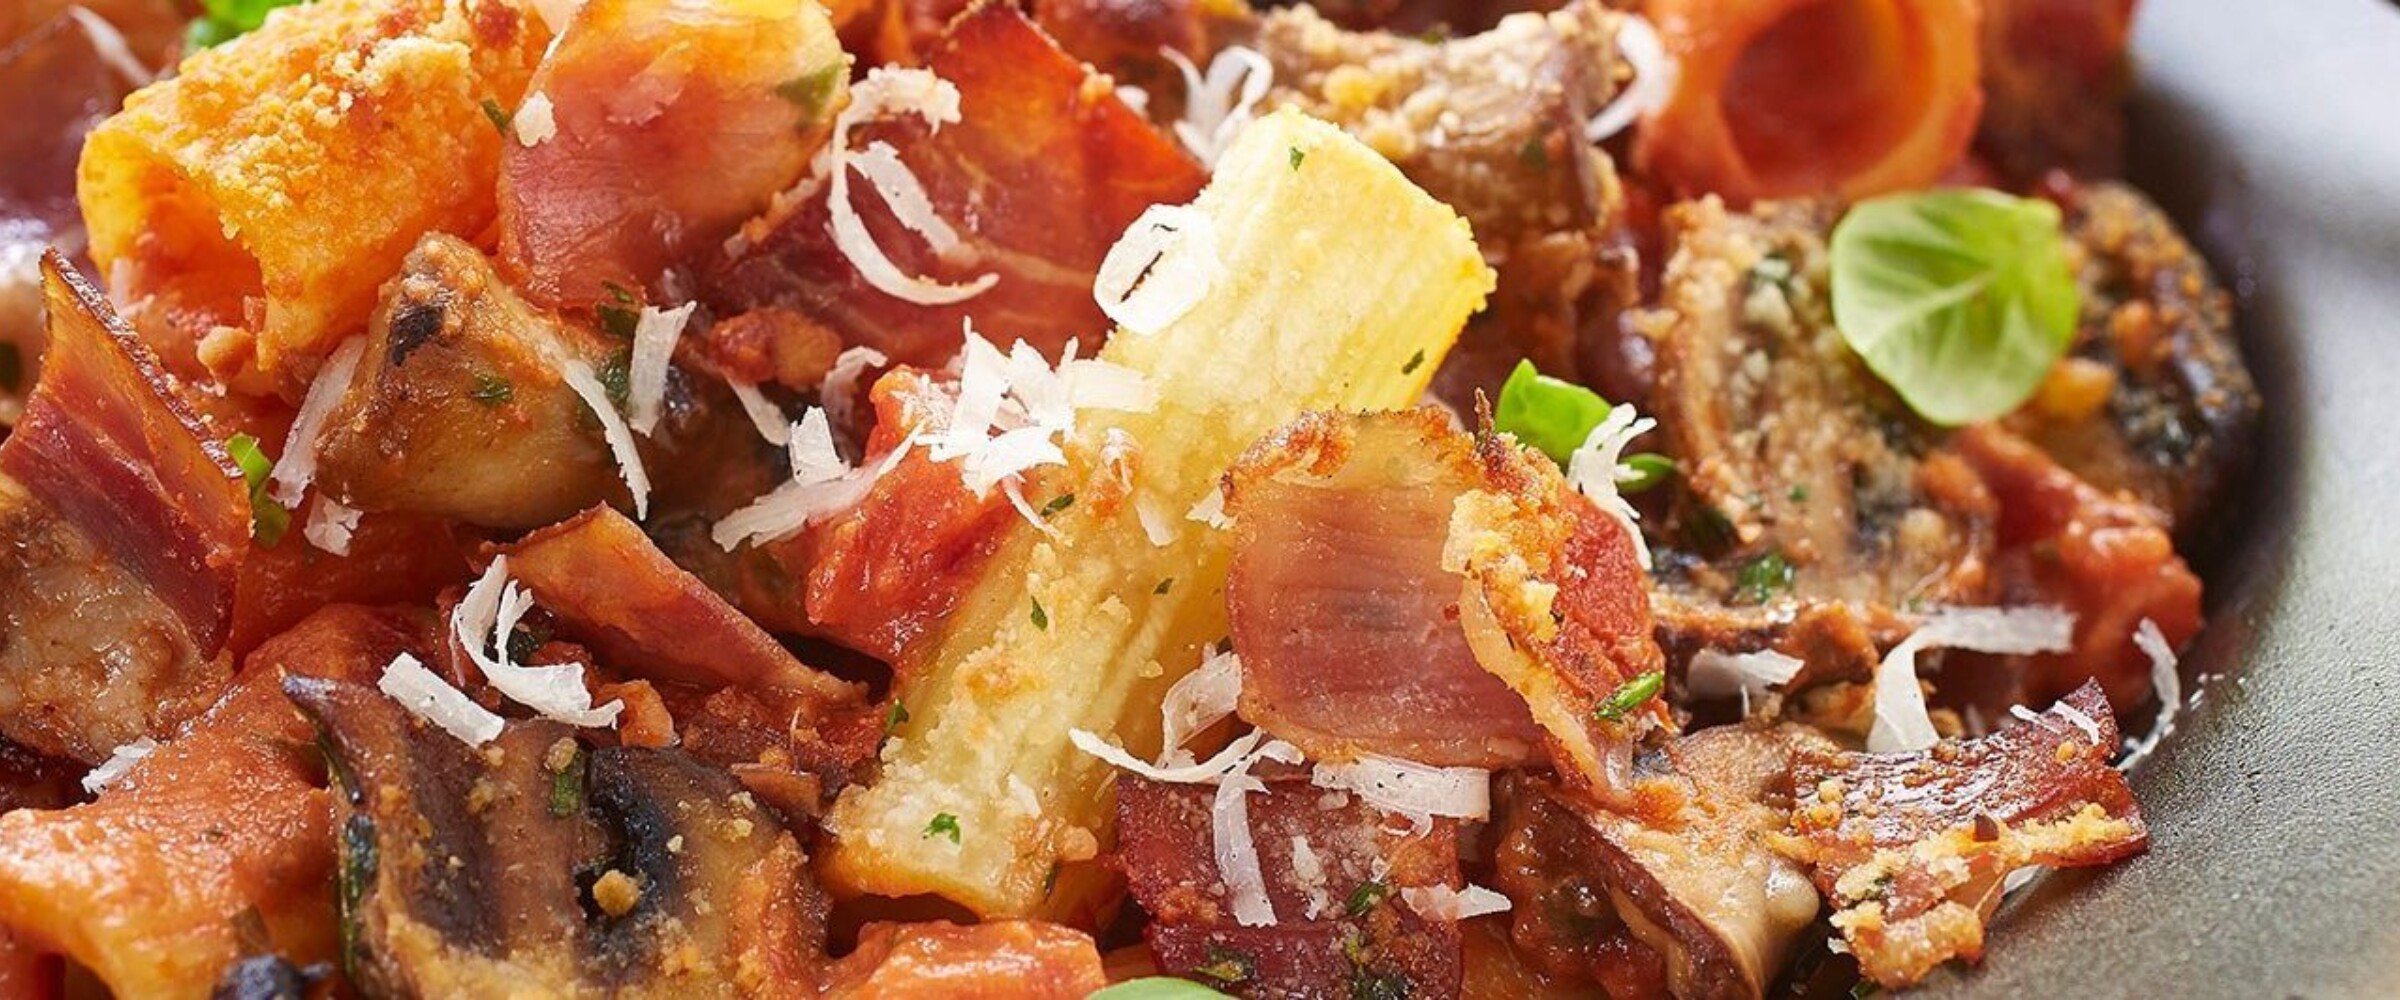 Baked rigatoni with speck prosciutto and parmesan cheese on a grey plate